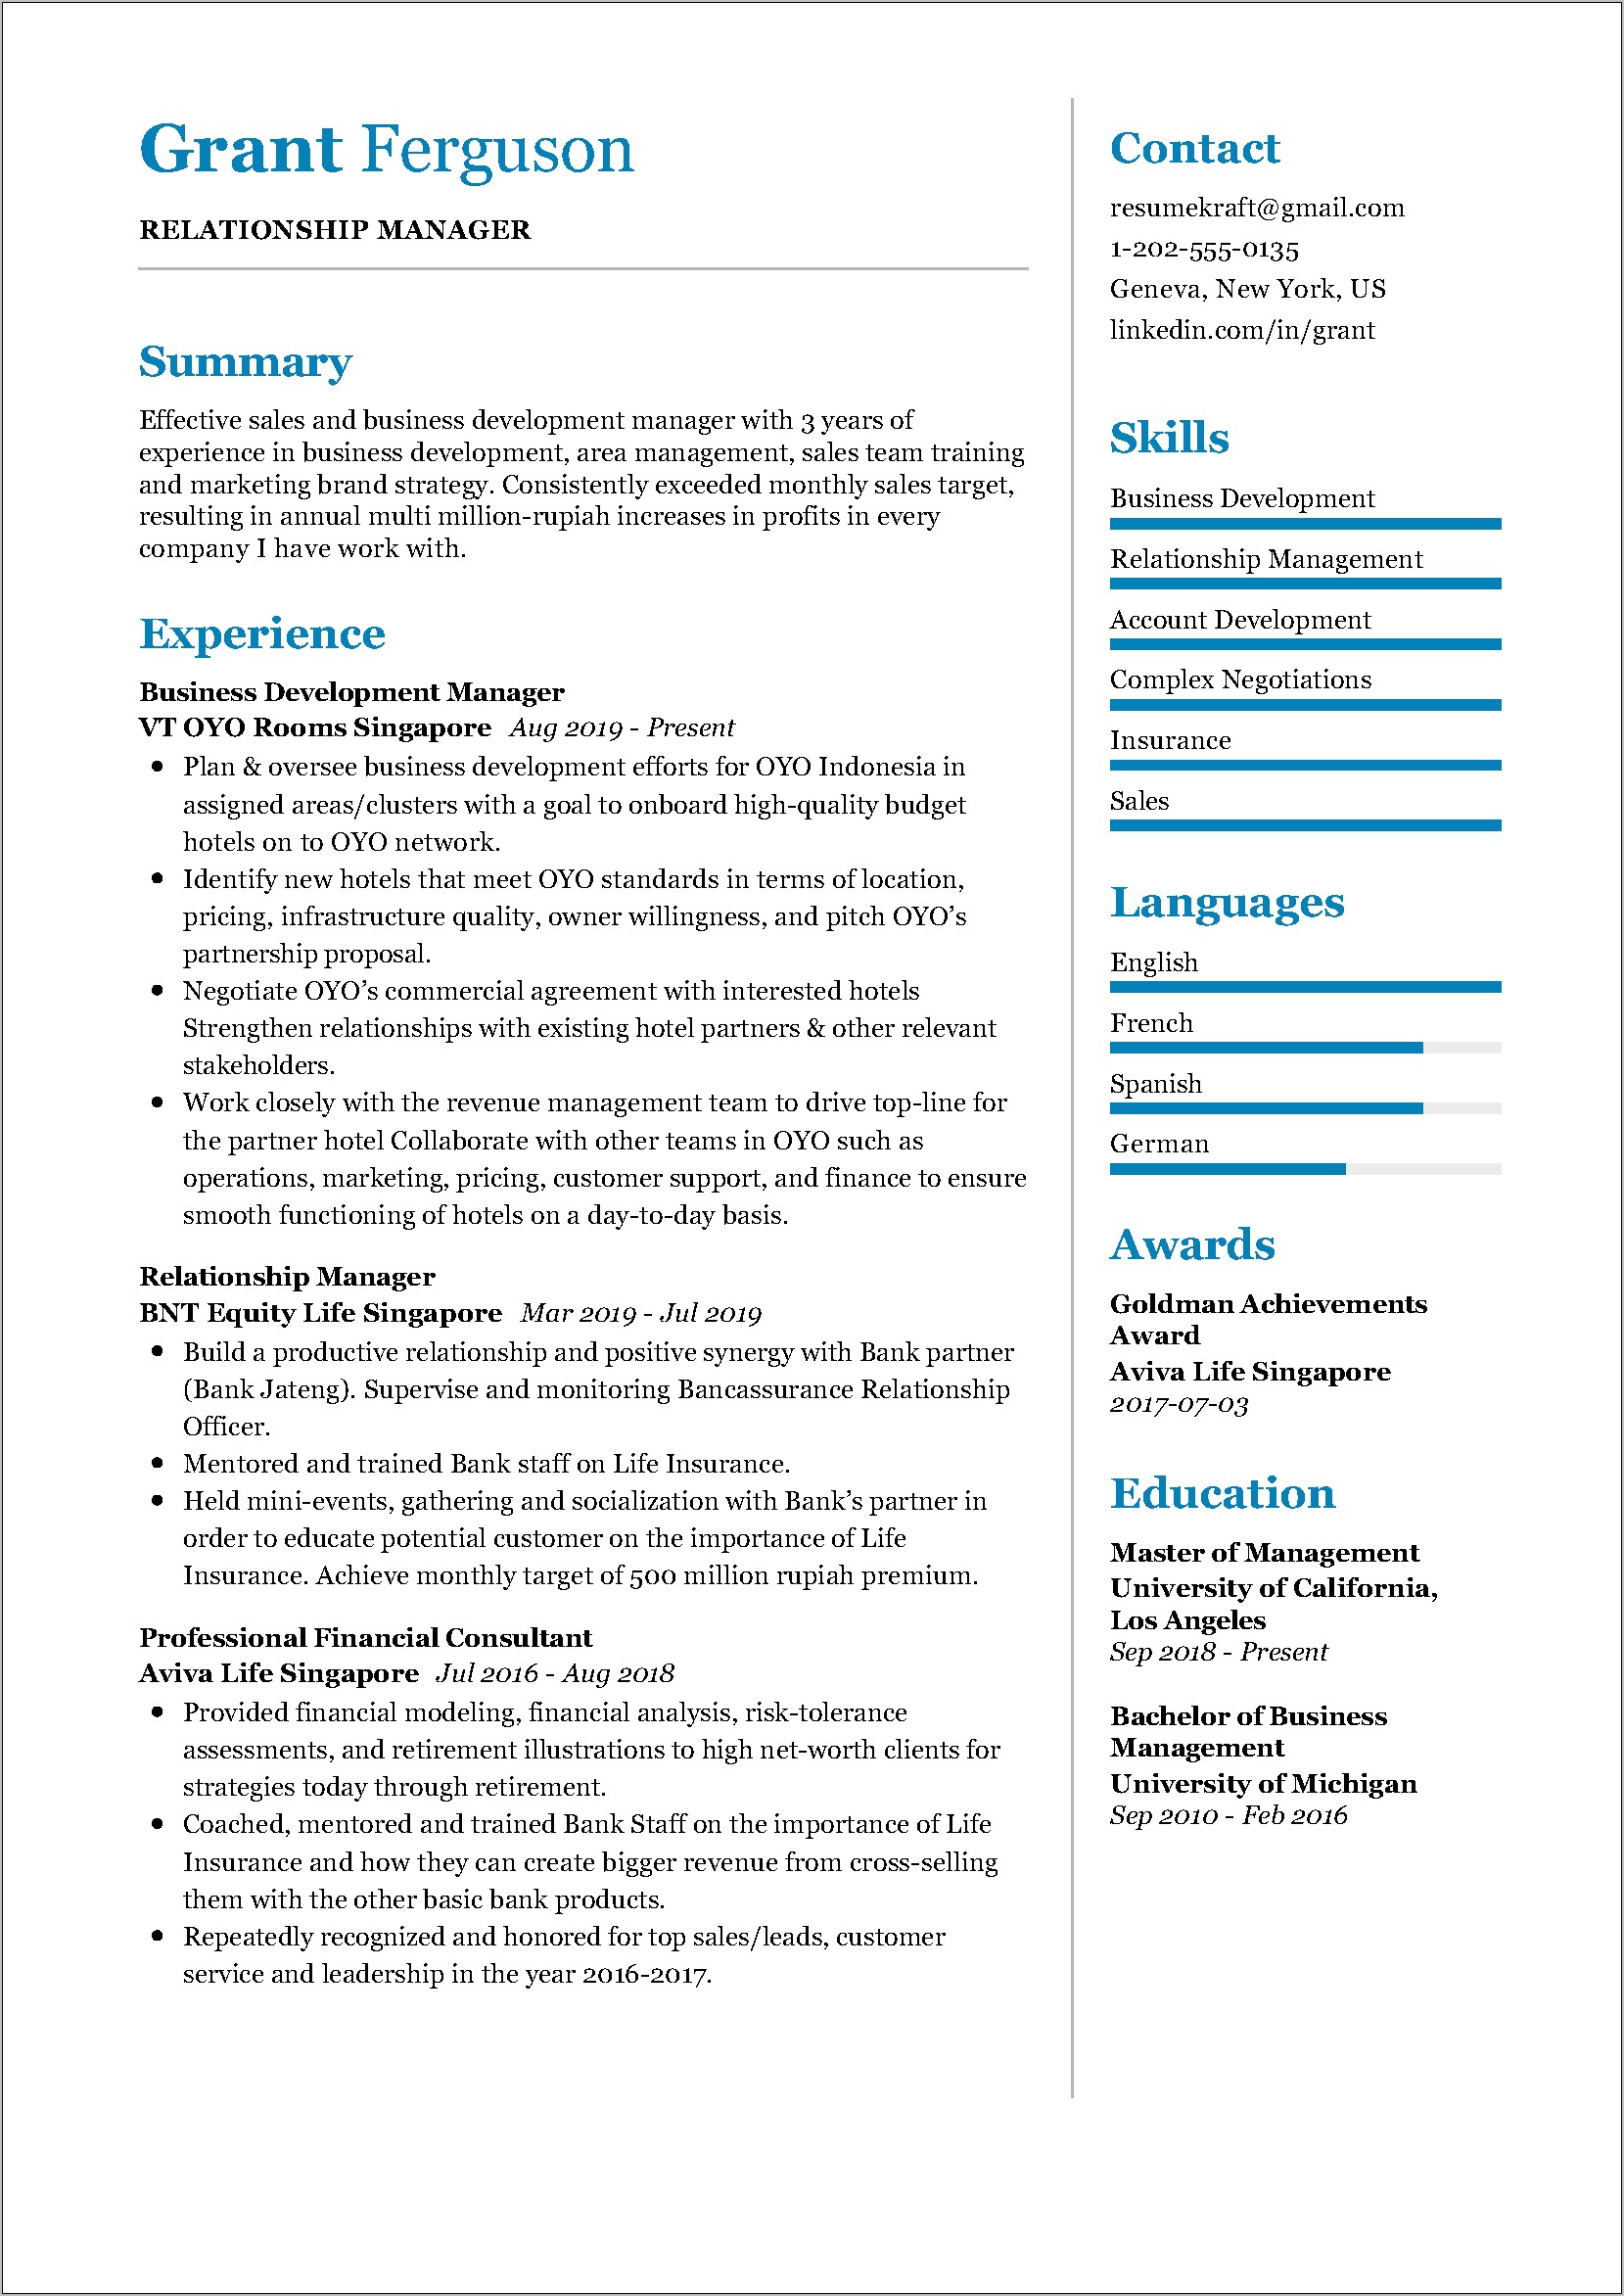 Accounting Manager Resume Sample Pdf